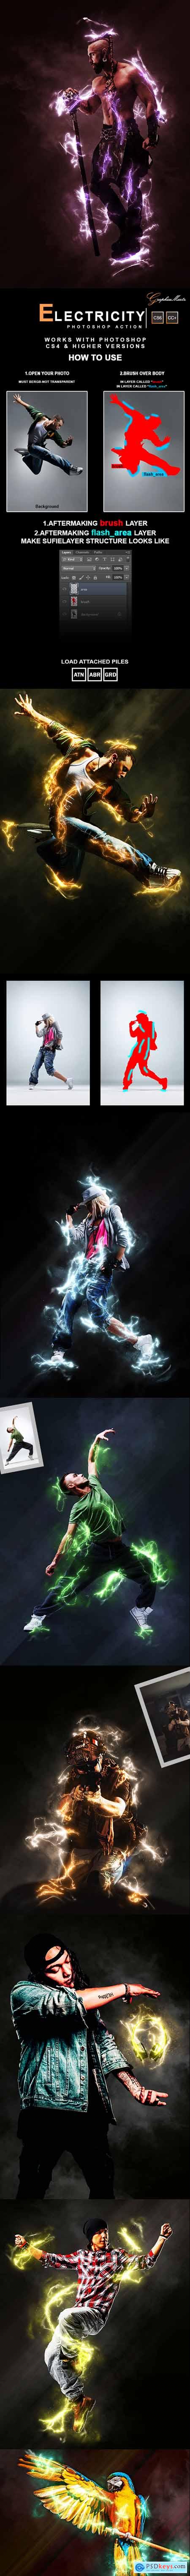 Electricity Photoshop Action 28441466